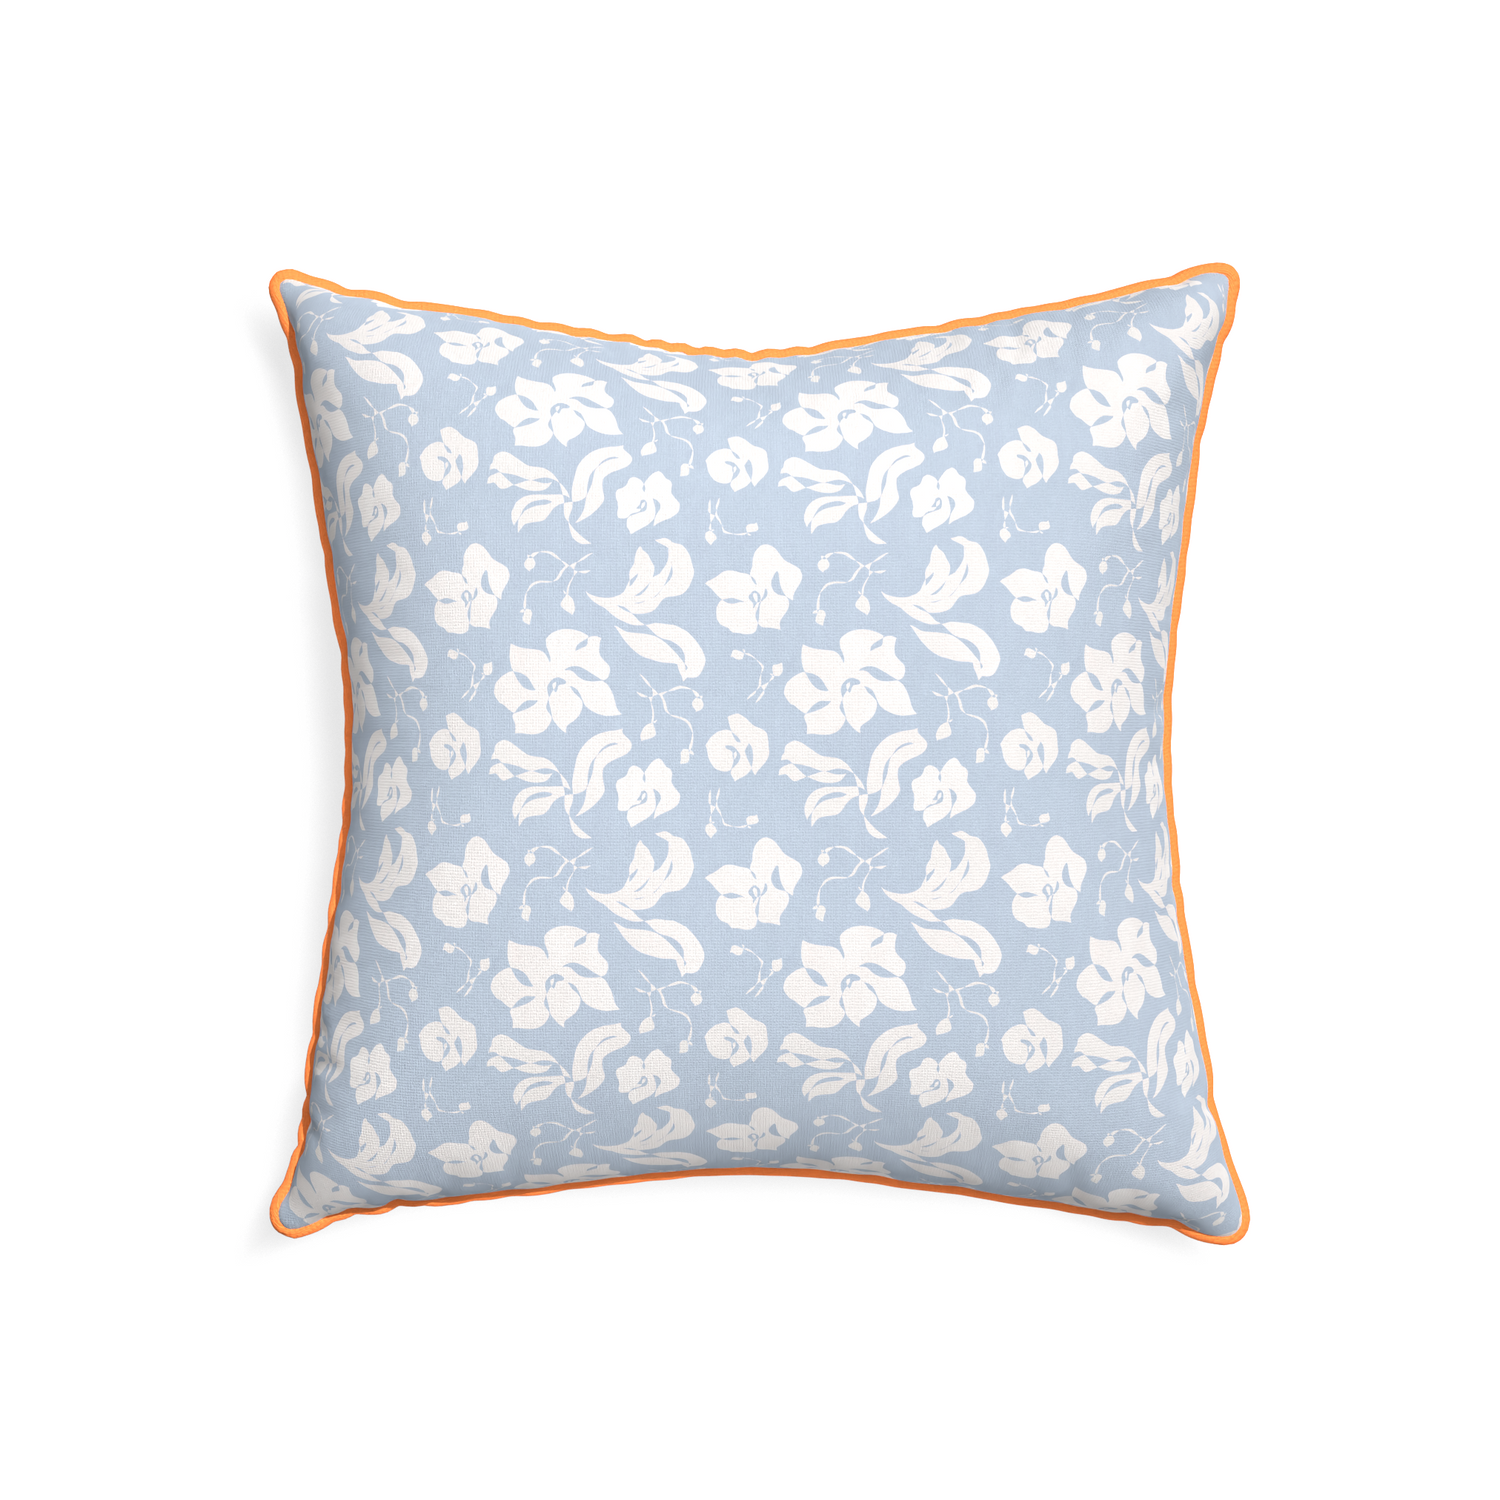 22-square georgia custom pillow with clementine piping on white background